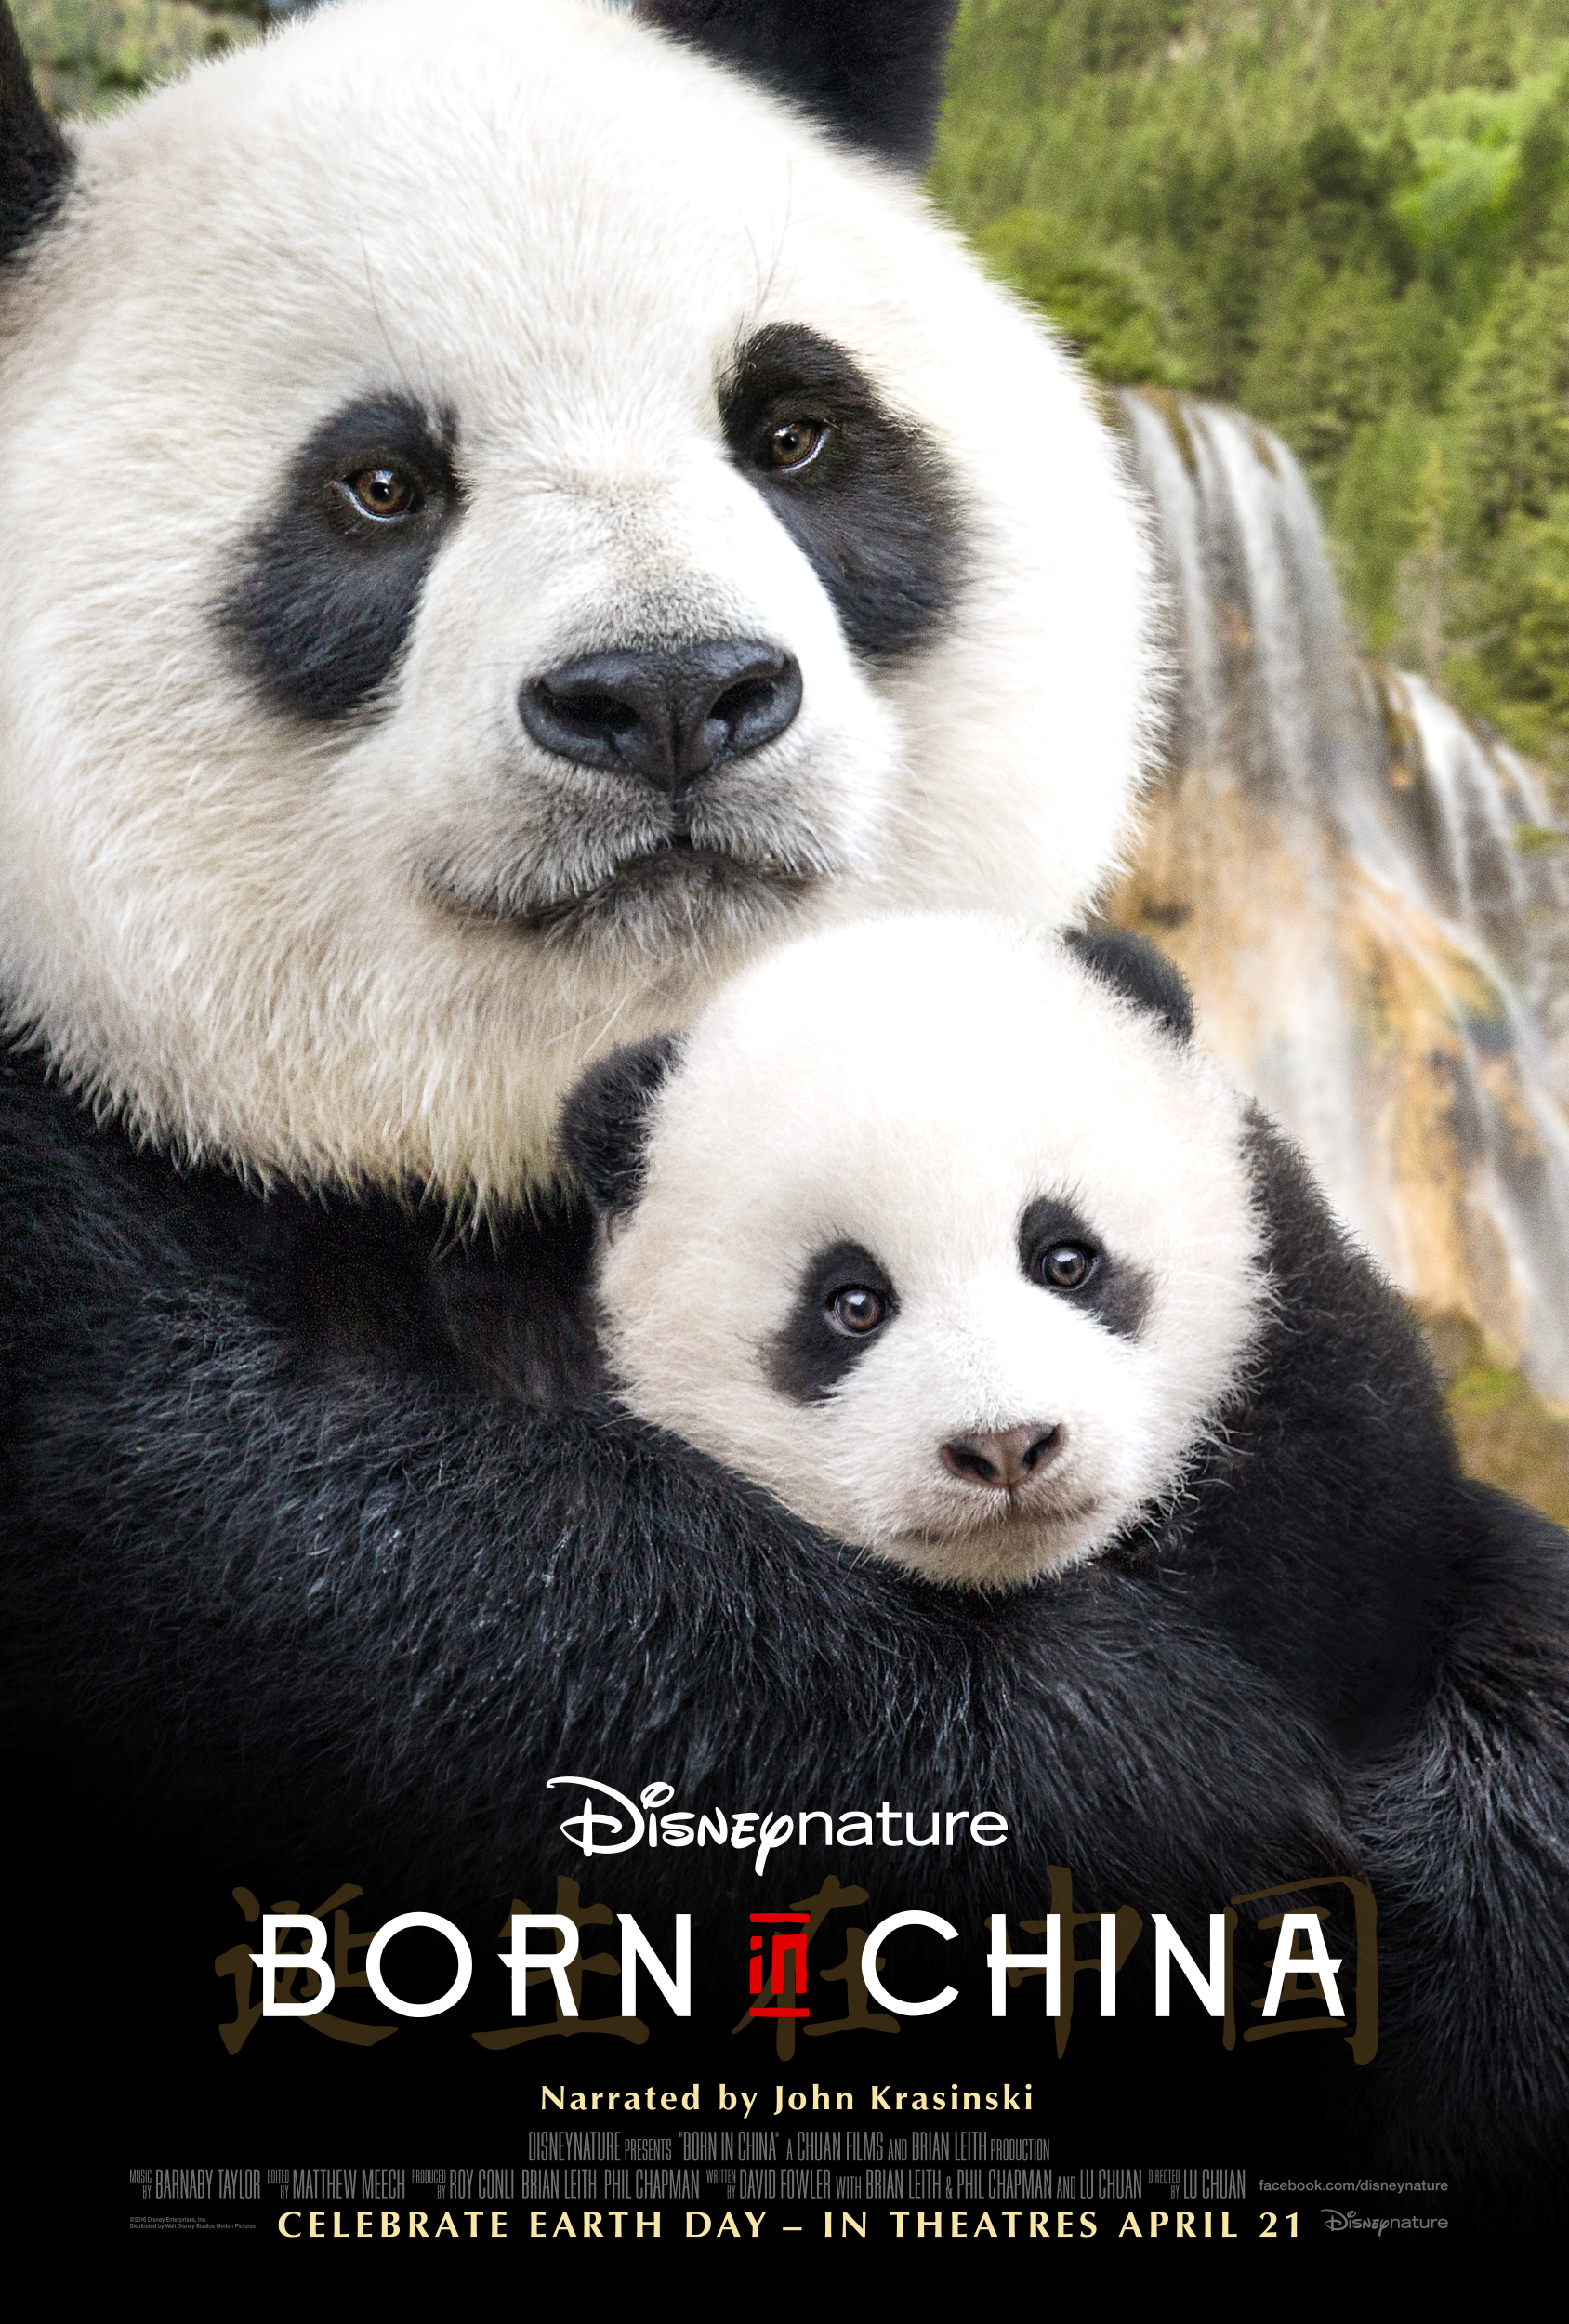 Born in China Disney Nature In Theaters April 21st - Celebrate Earth Day